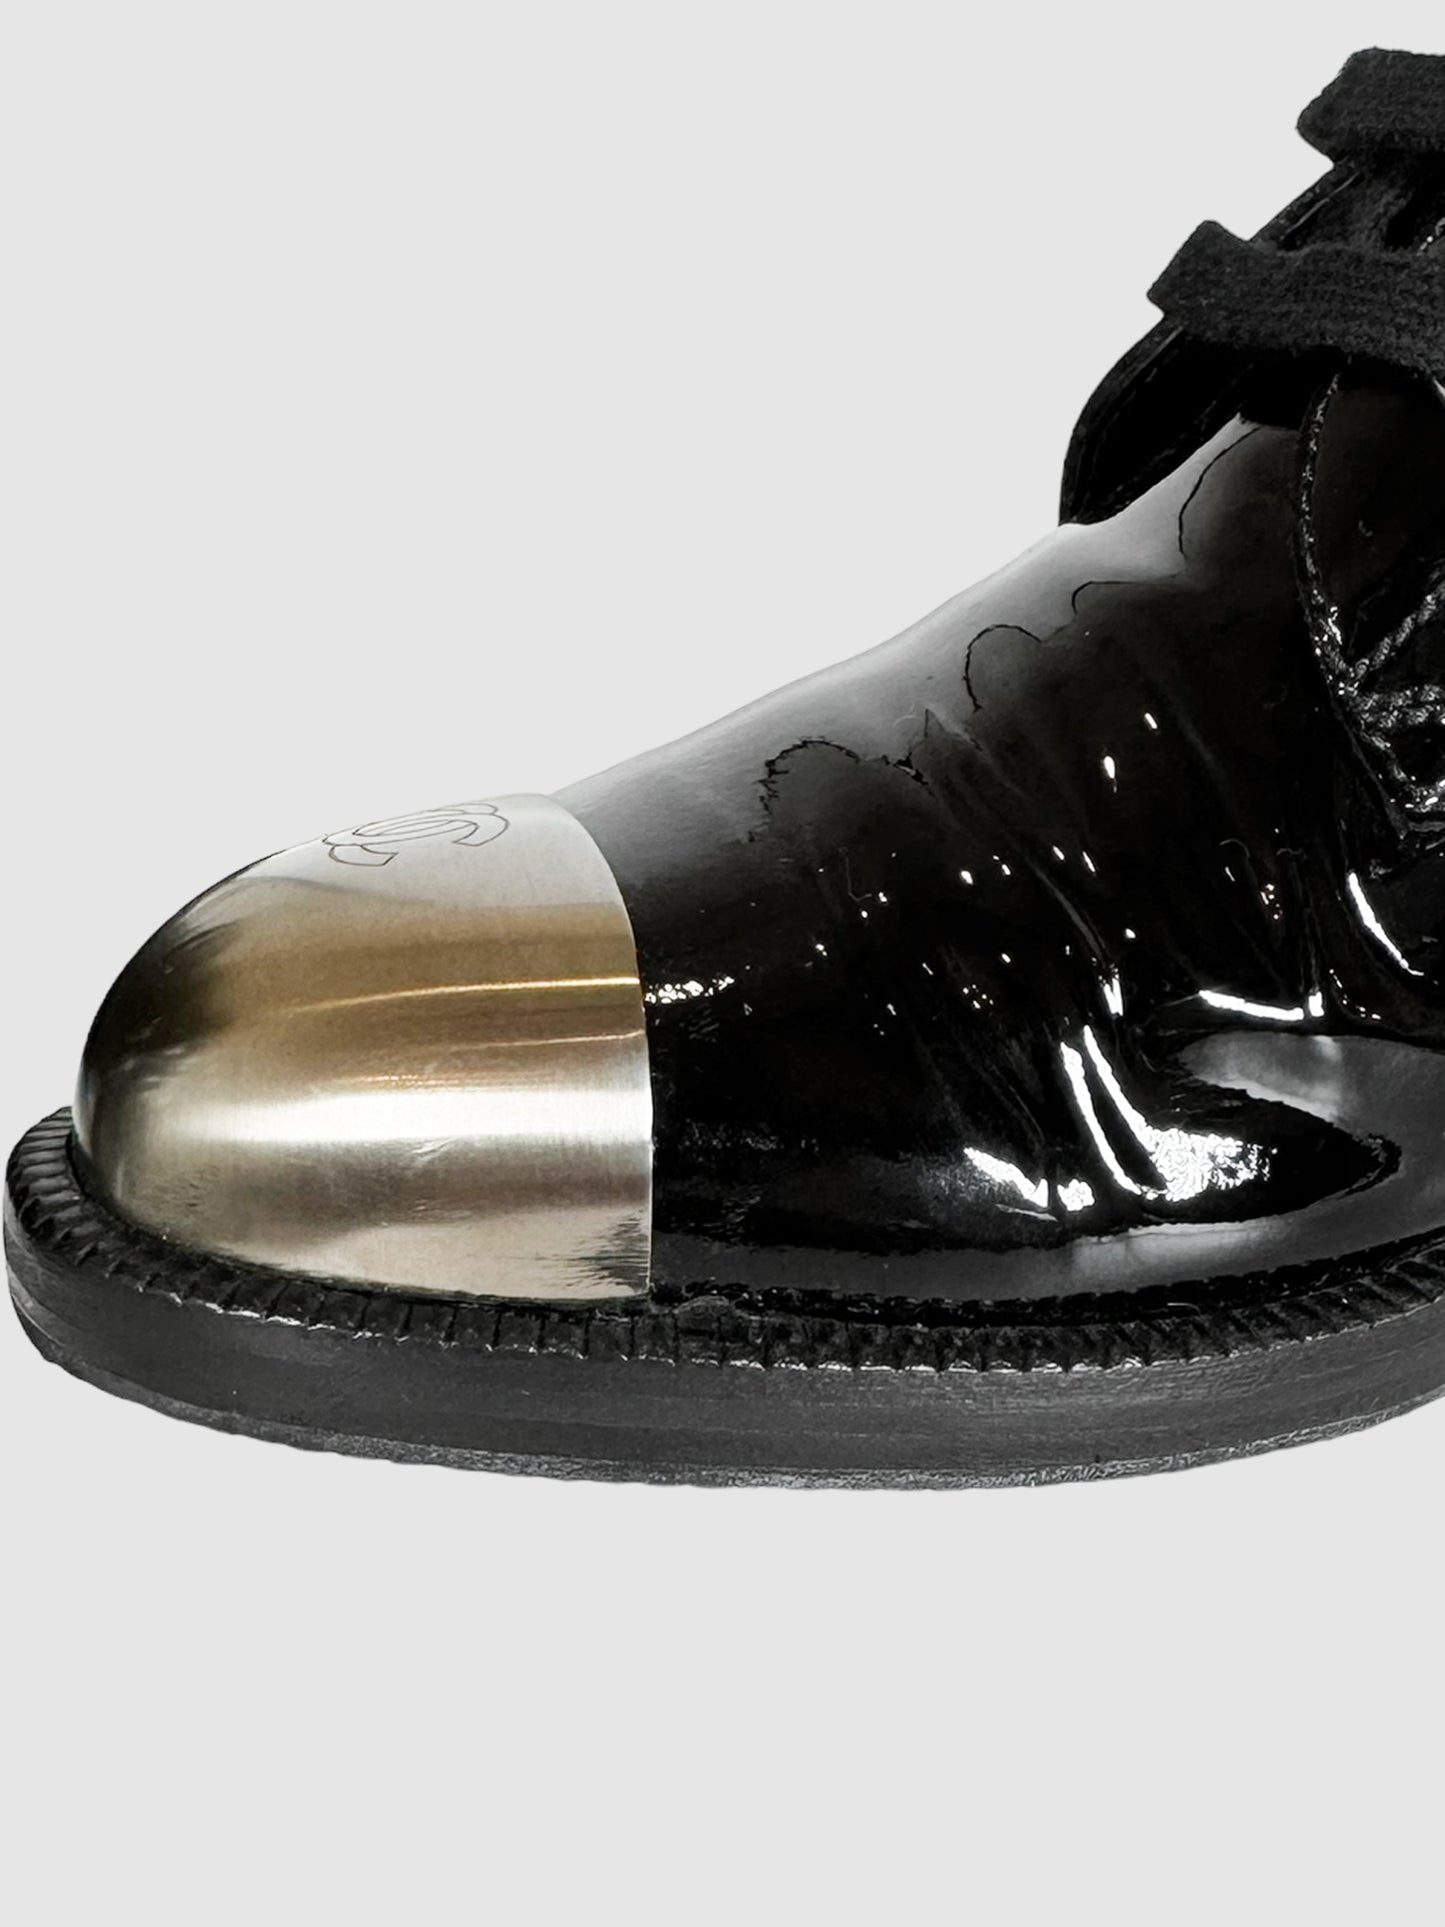 Patent Leather Combat Boots - Size 40